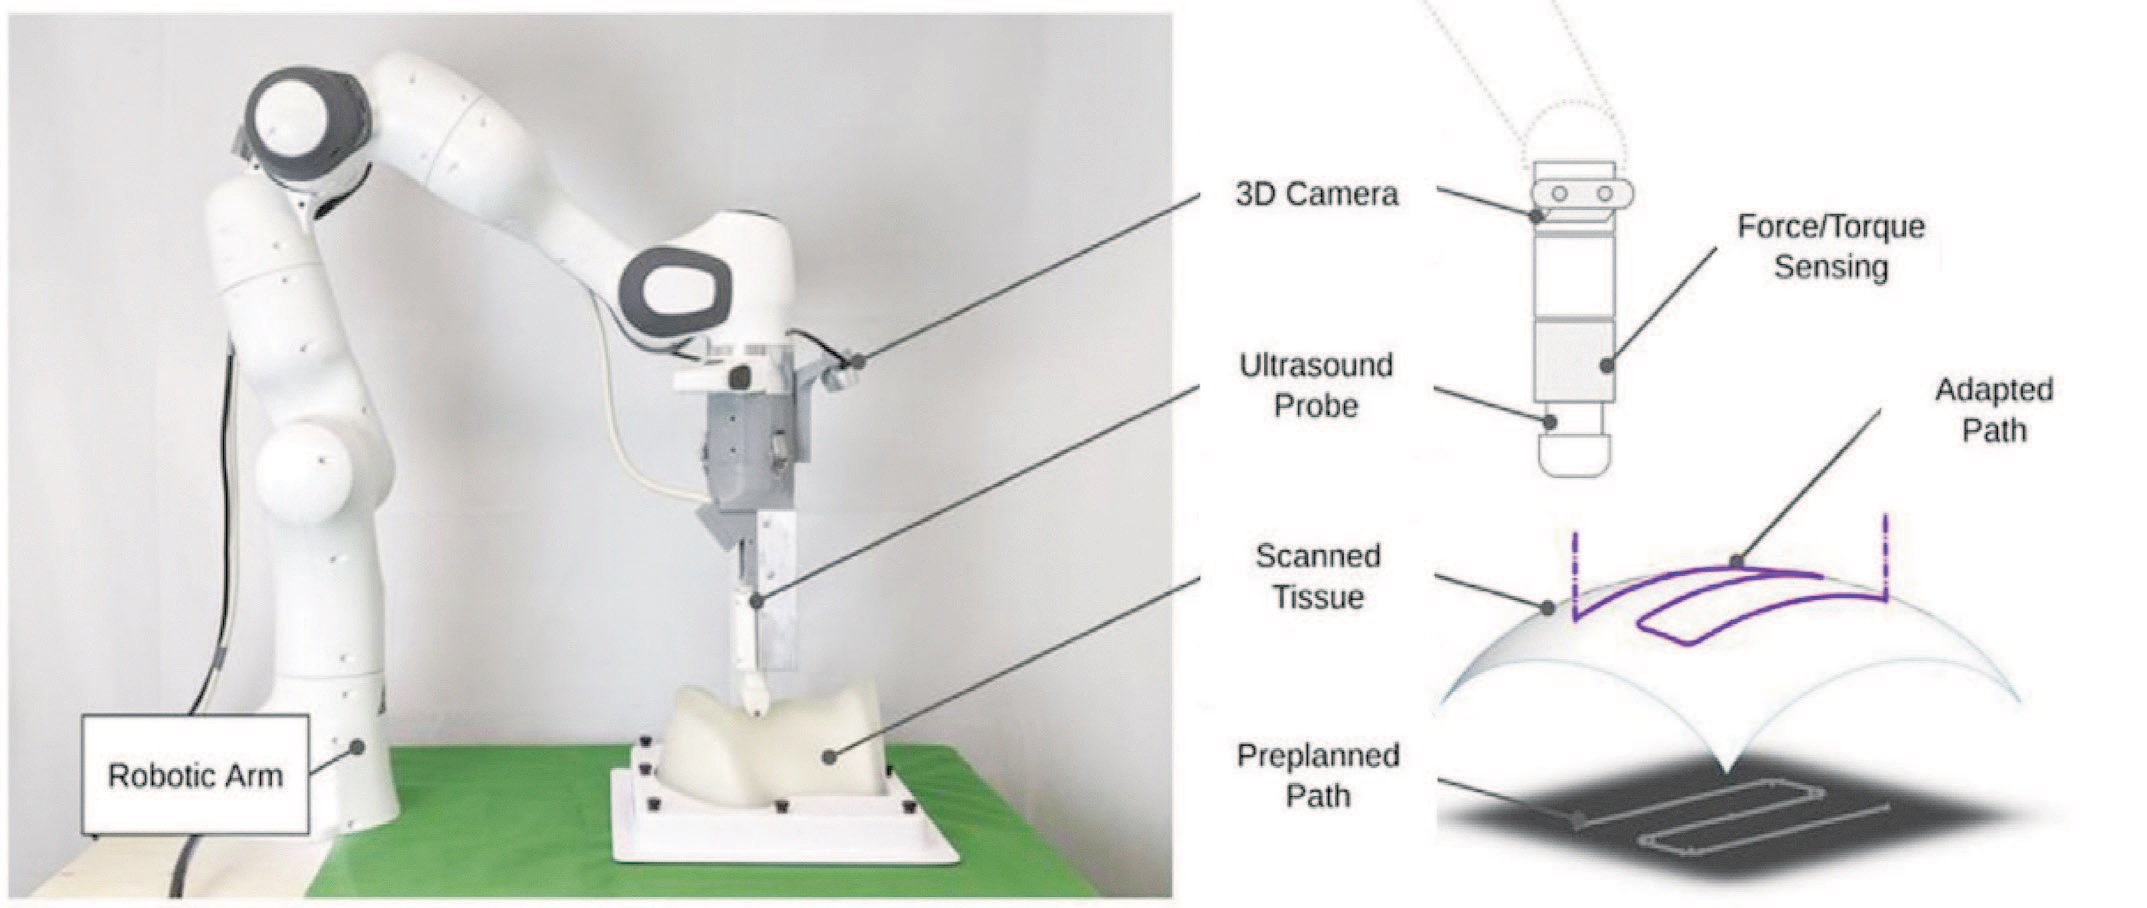 Robotic ultrasound system and its components